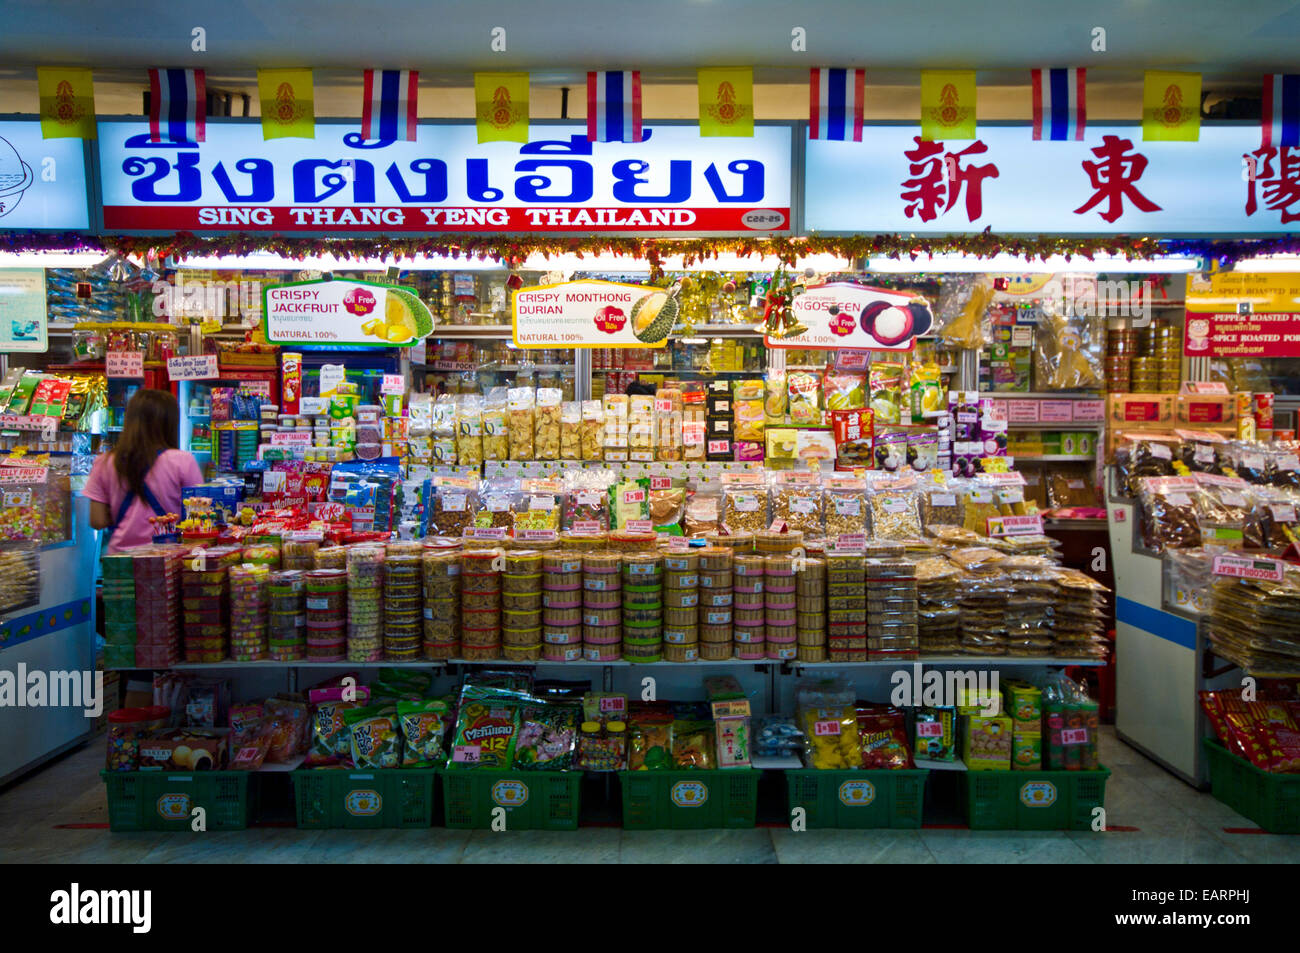 Nuts, noodles and dried goods for sale in a shopping mall food court. Stock Photo